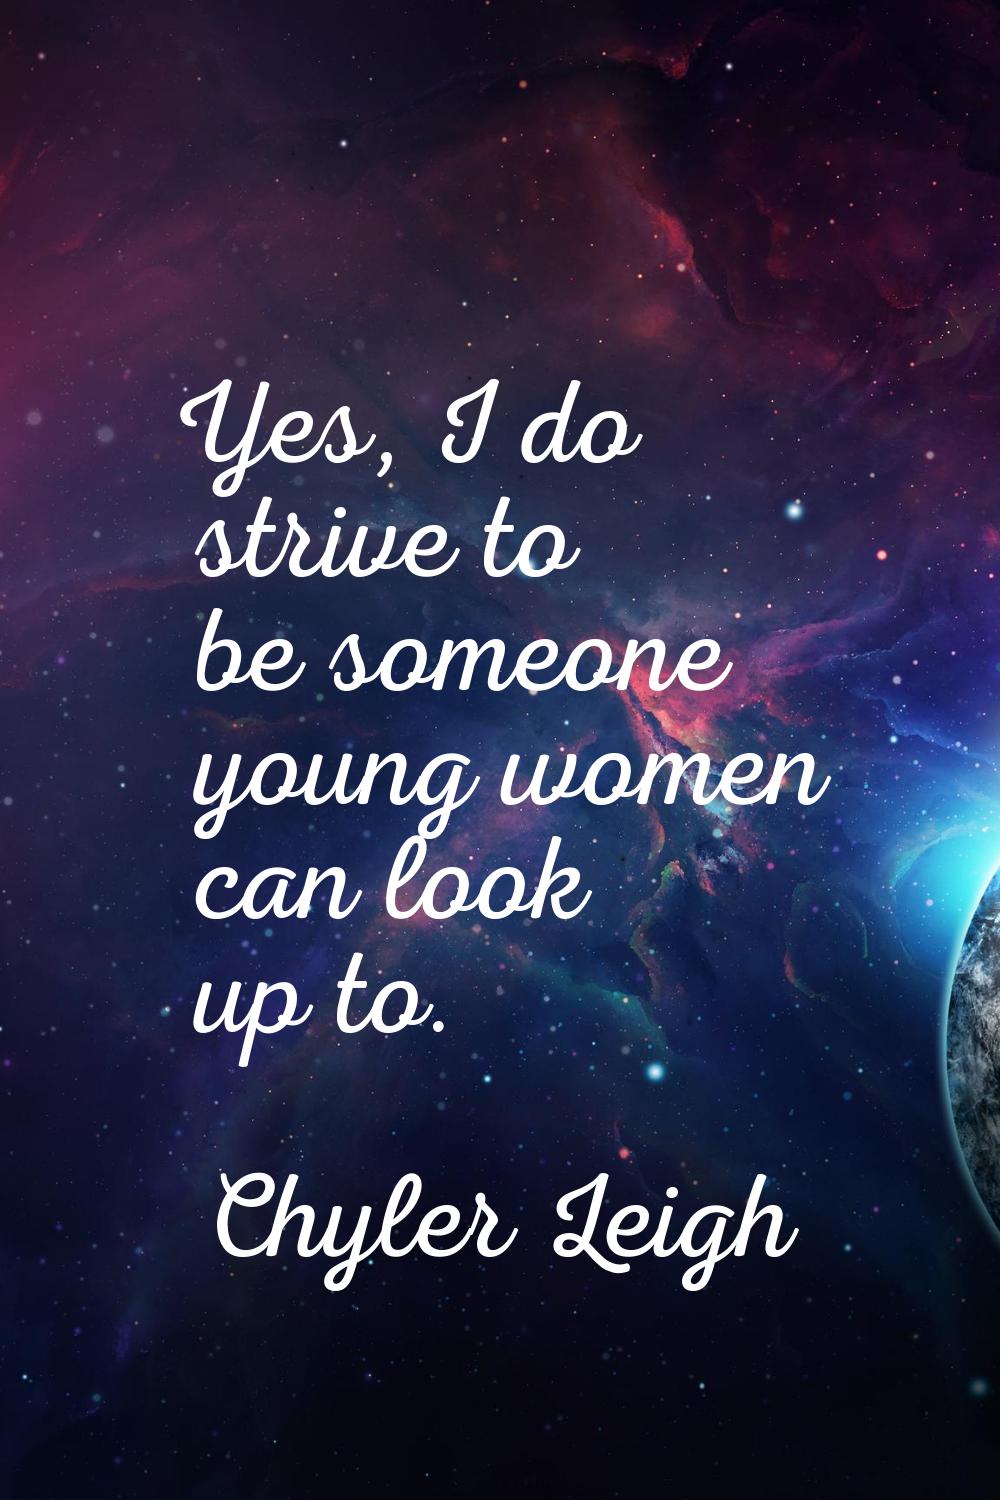 Yes, I do strive to be someone young women can look up to.